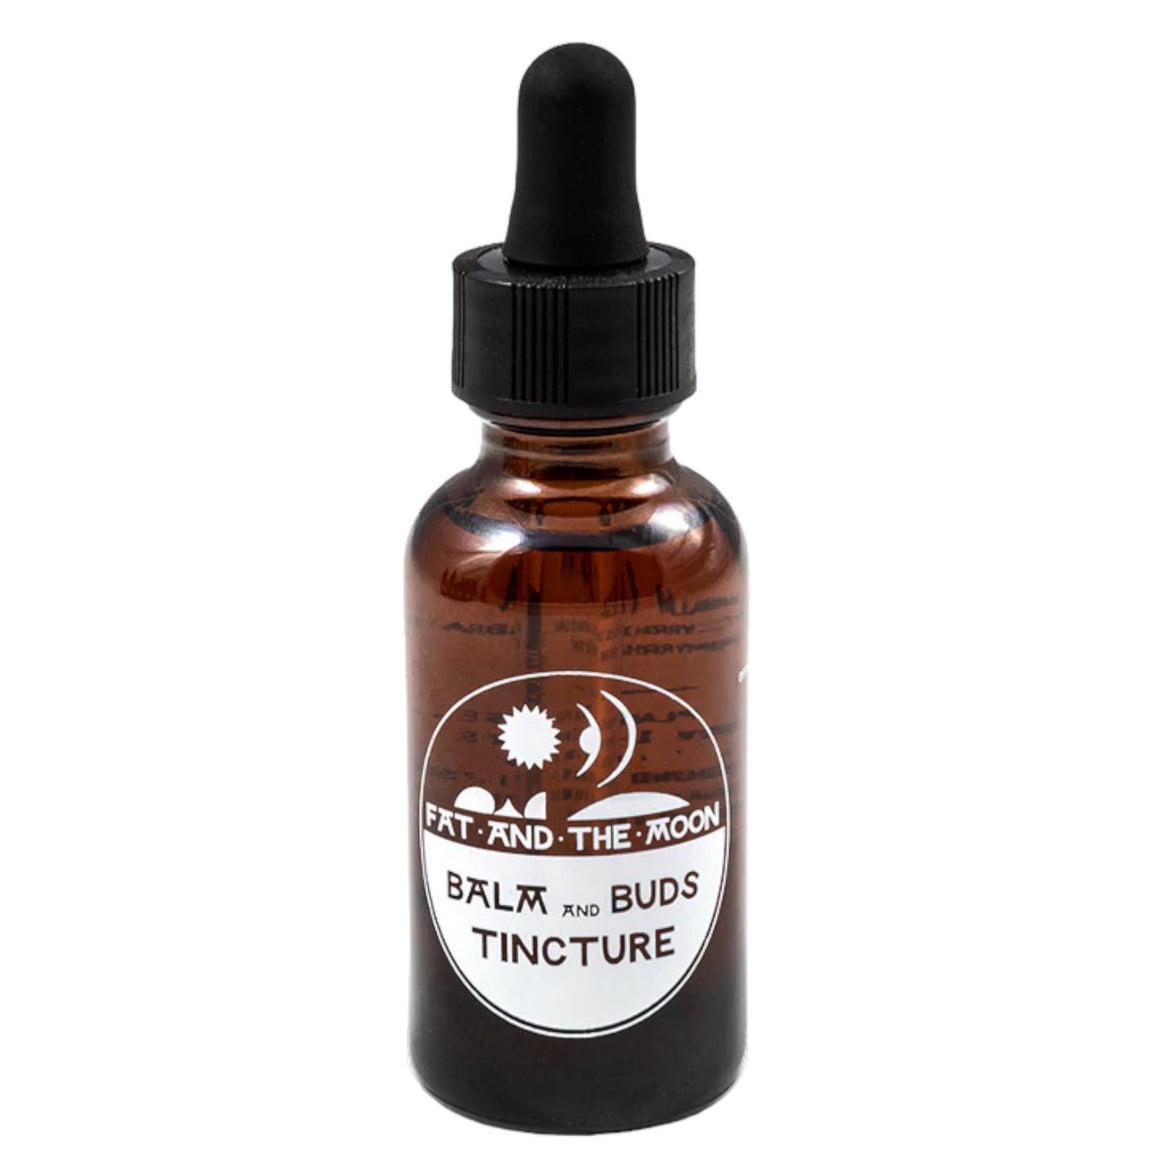 Balm & Buds Tincture 1oz - Fat & The Moon